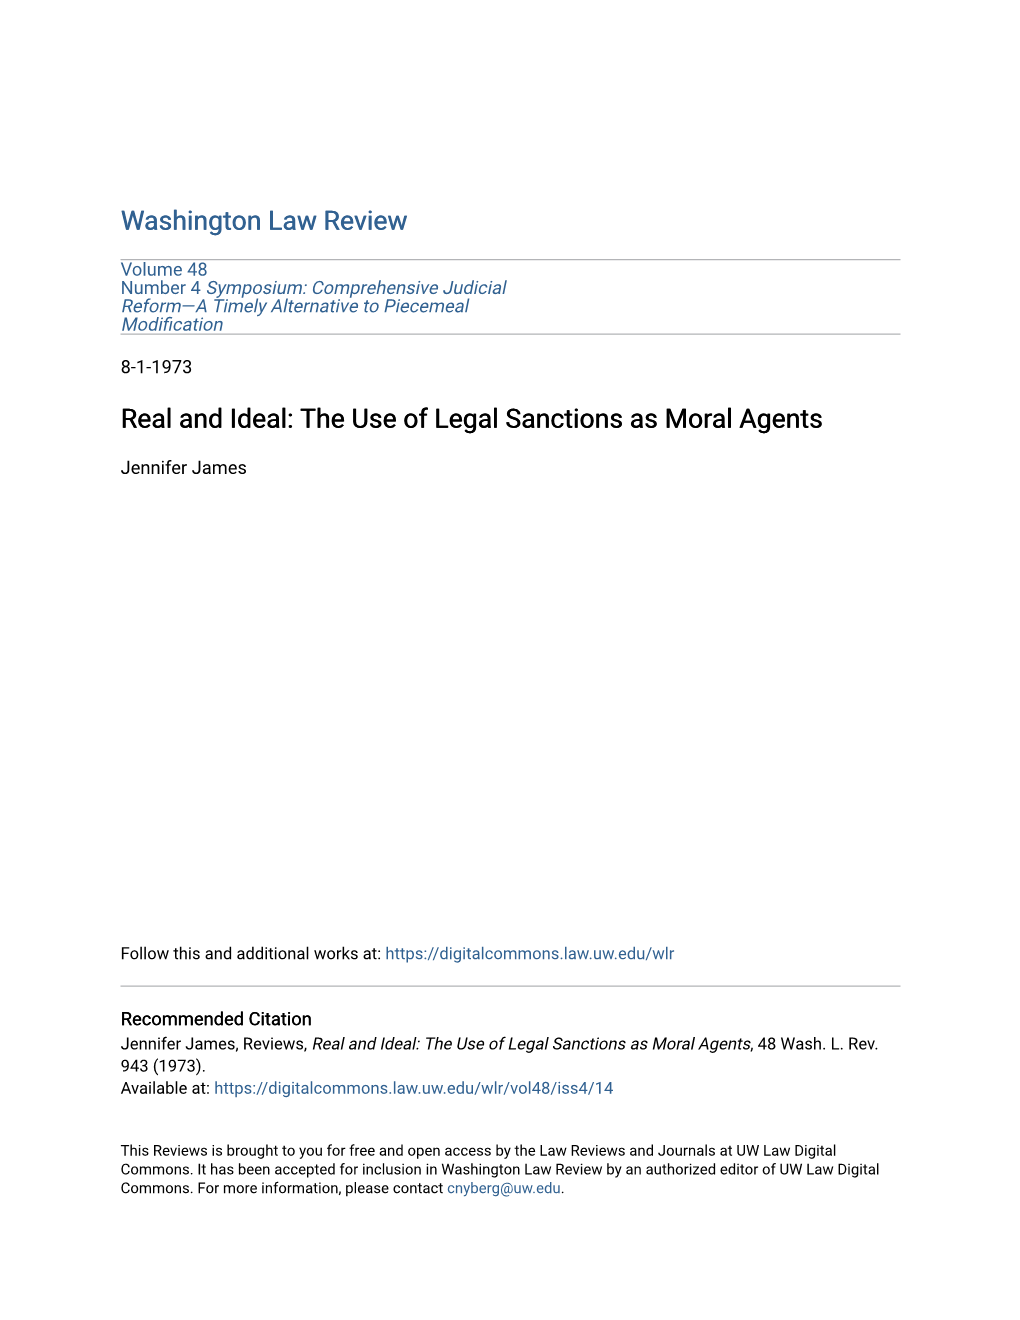 The Use of Legal Sanctions As Moral Agents